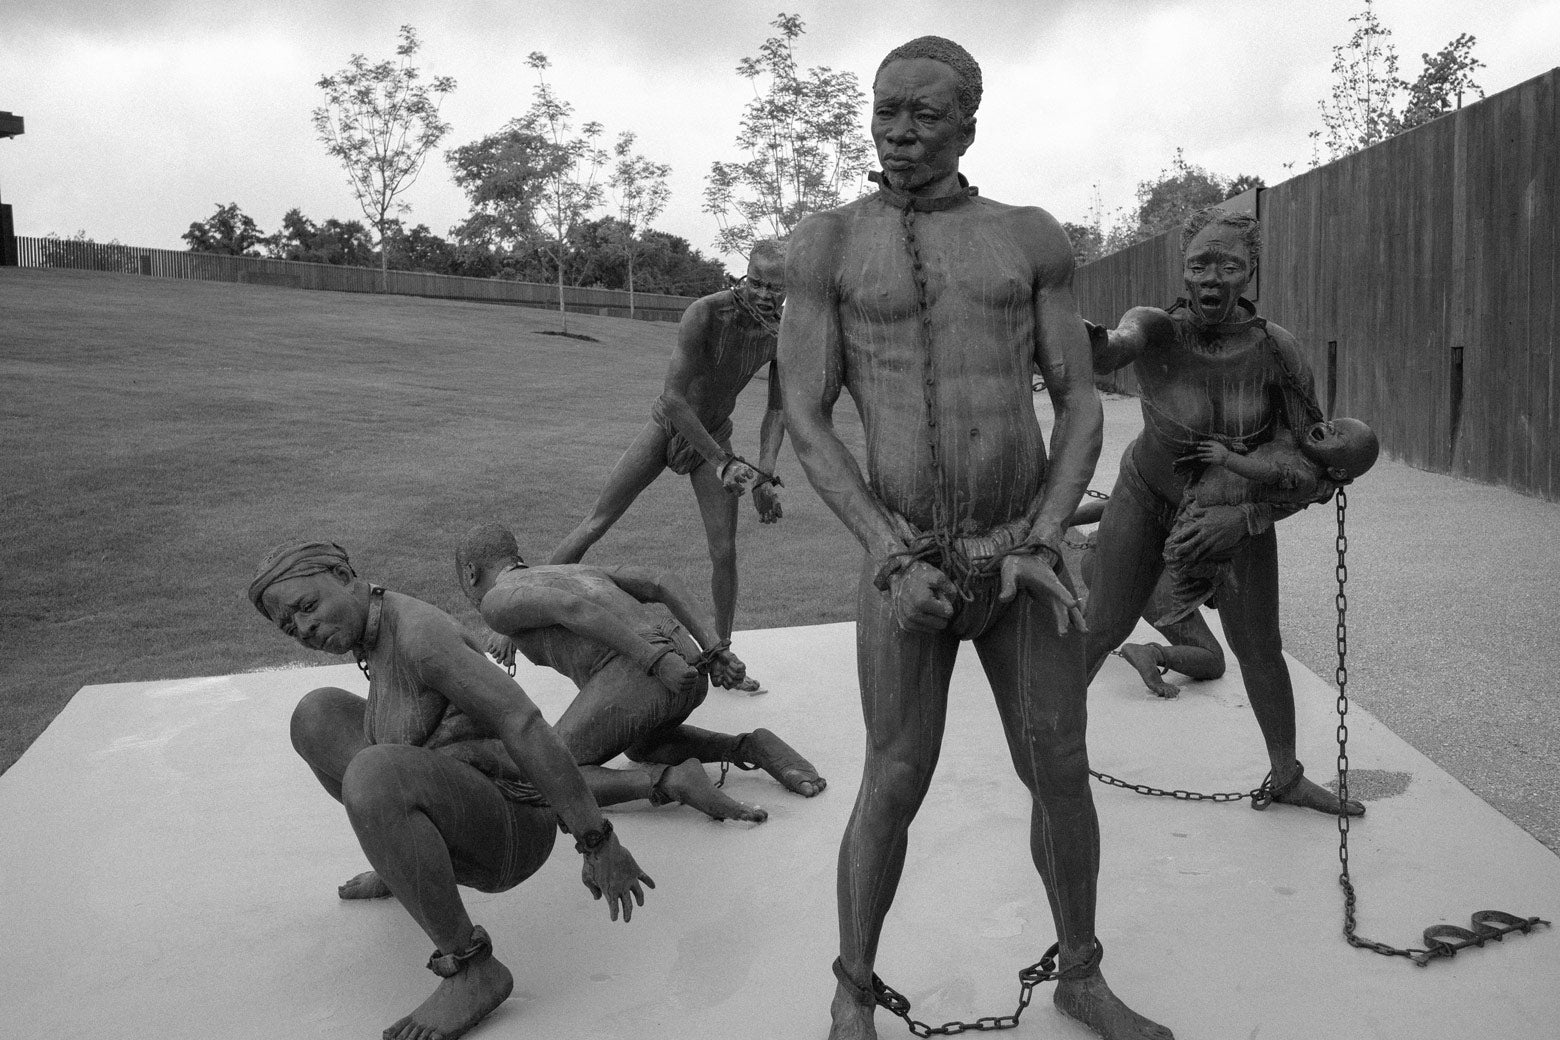 A sculpture depicting Africans captured into slavery.